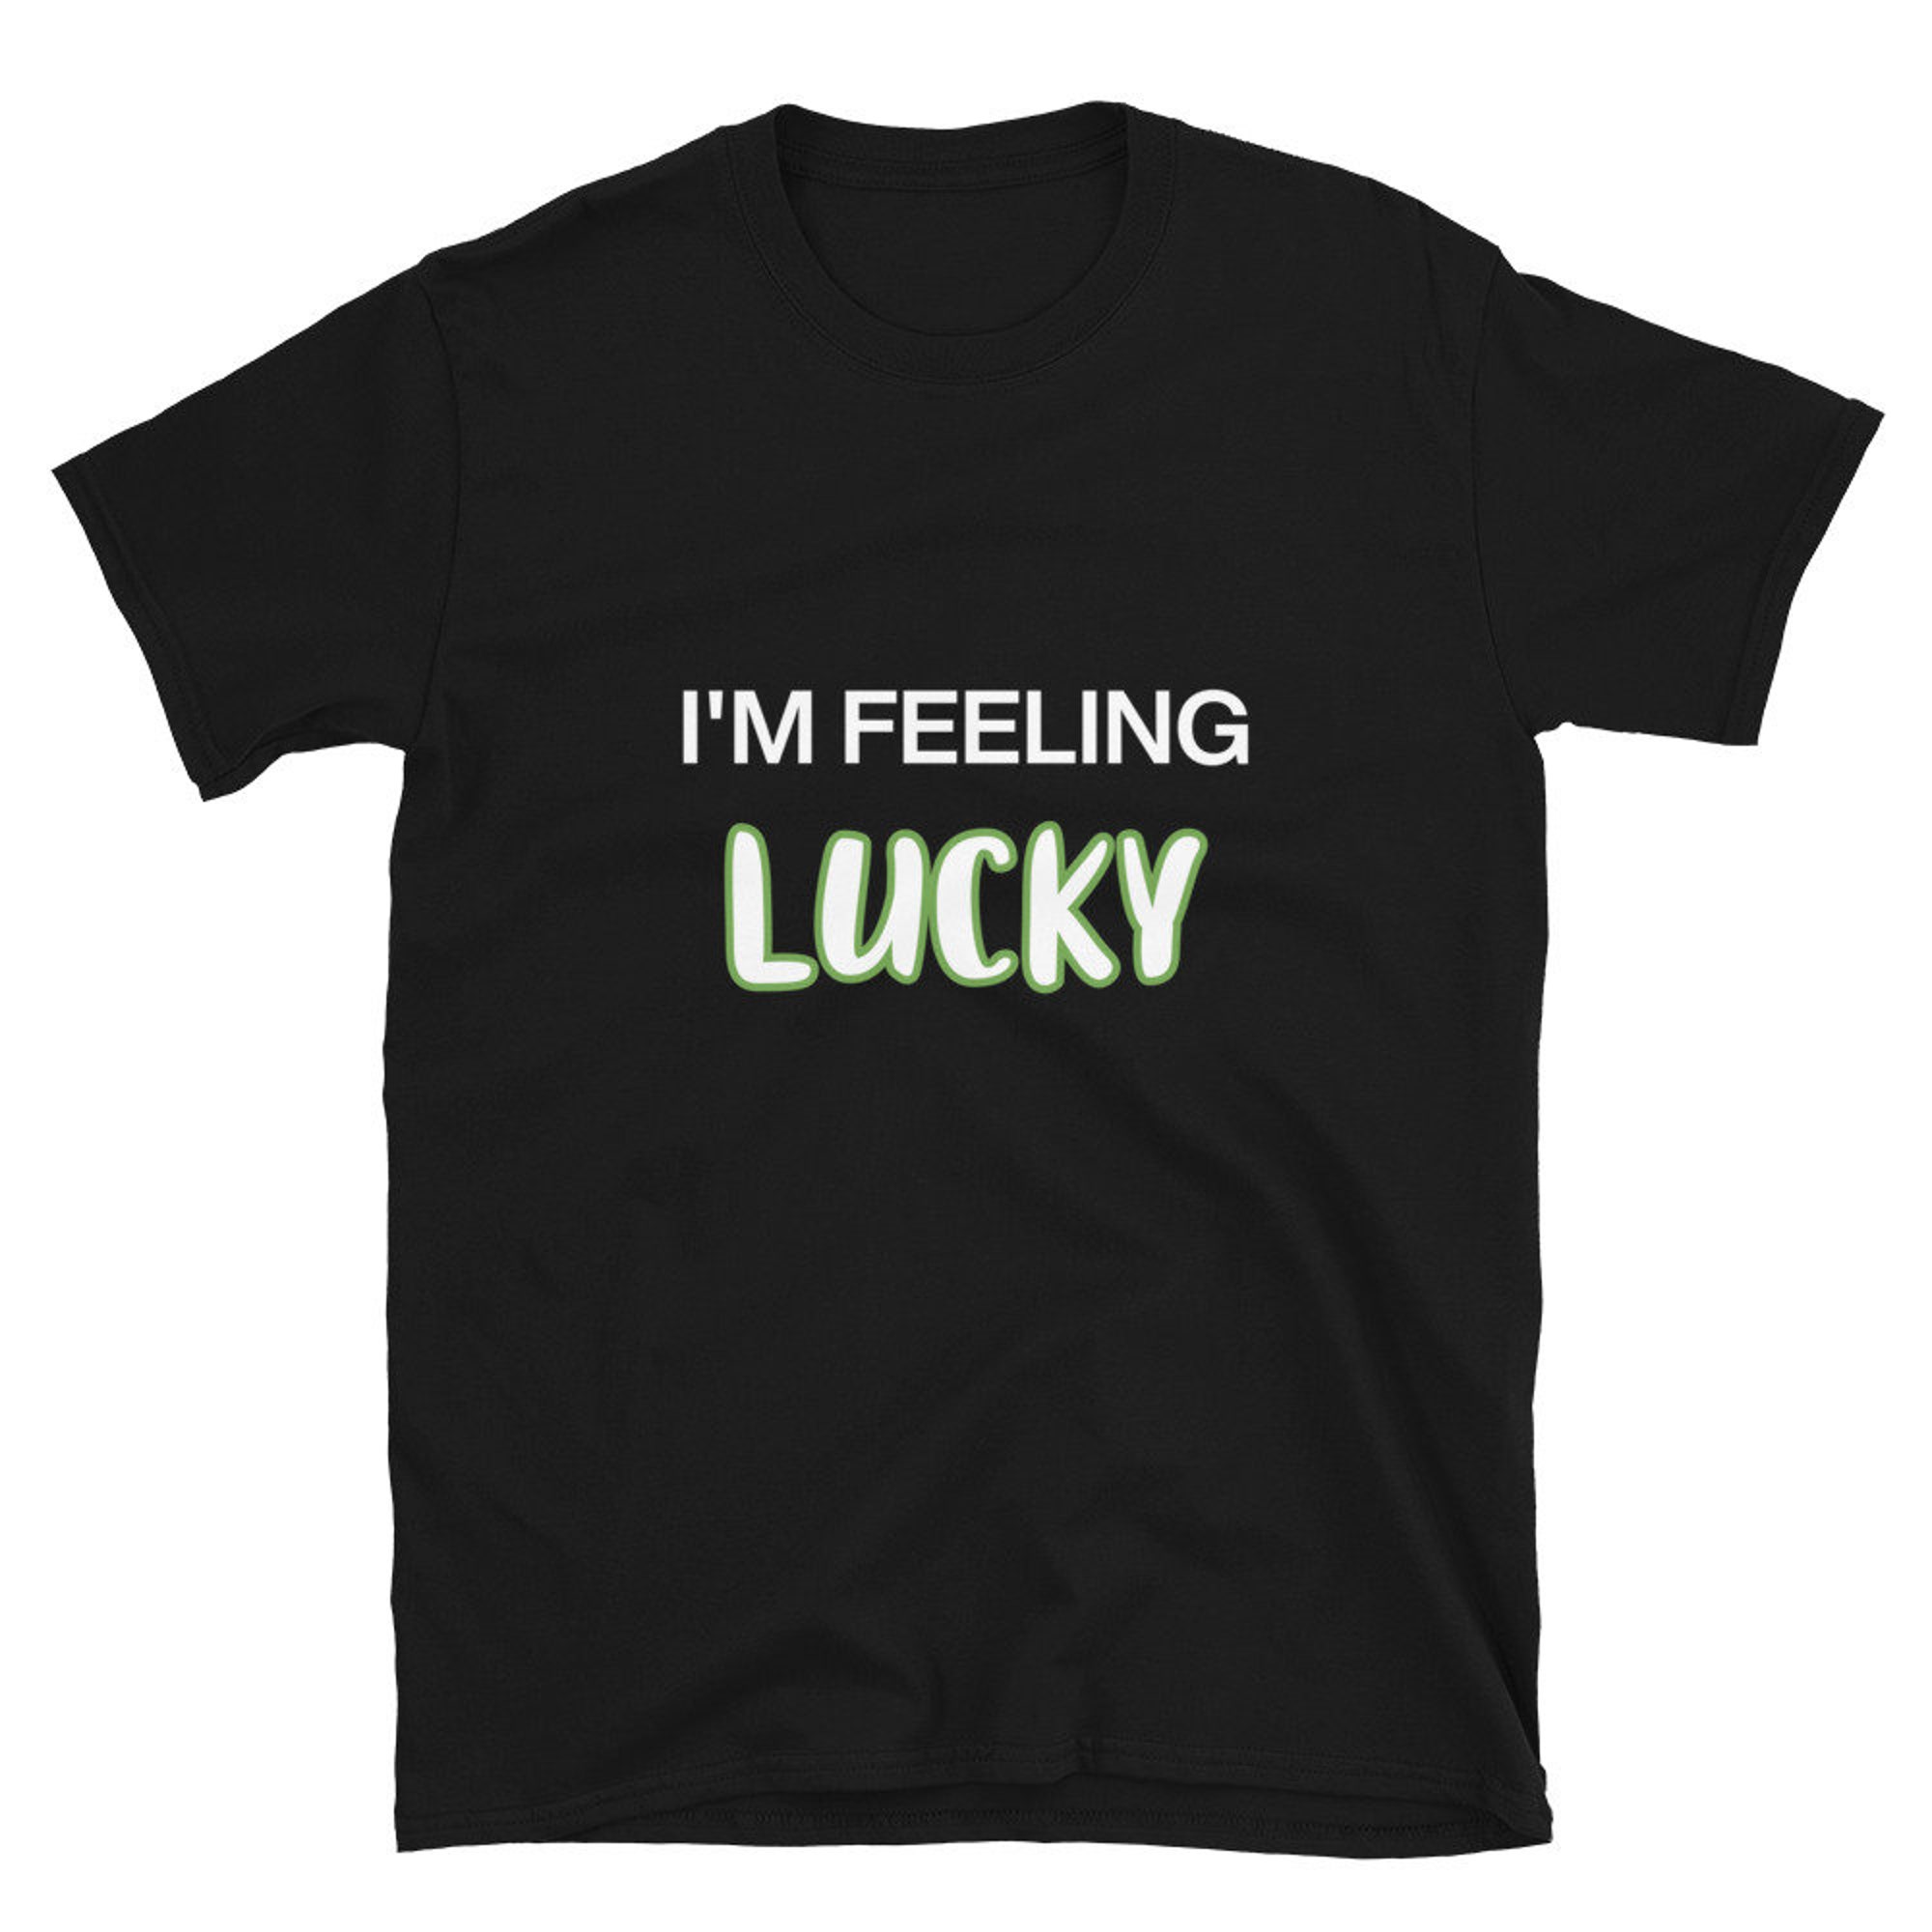 Discover I'm Feeling Lucky T-Shirt